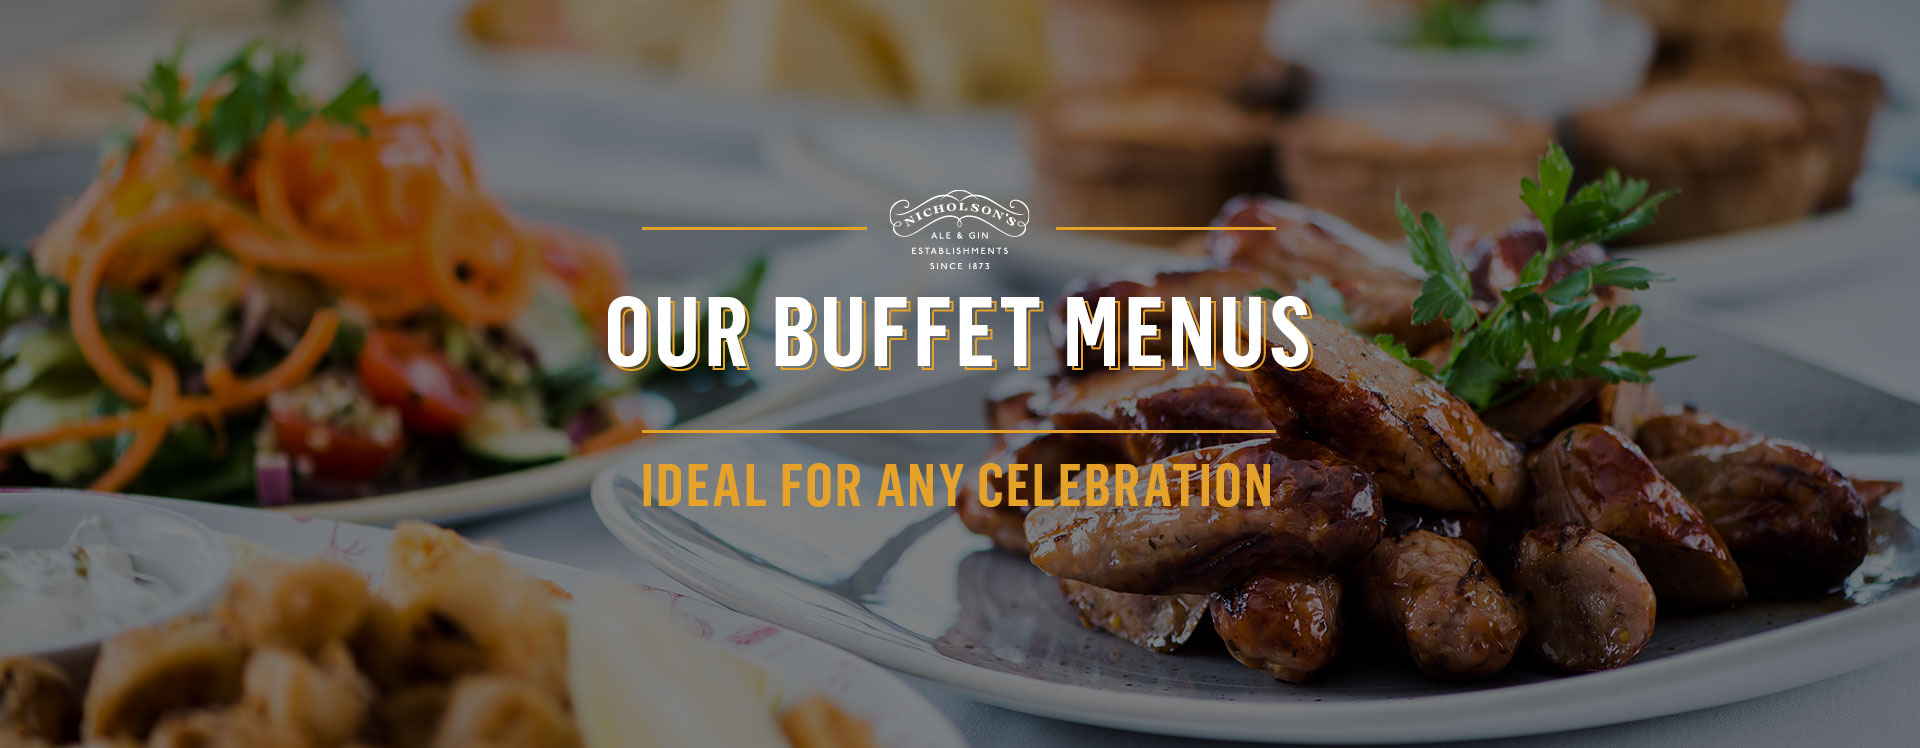 Buffet menu at The Feathers - Book a table